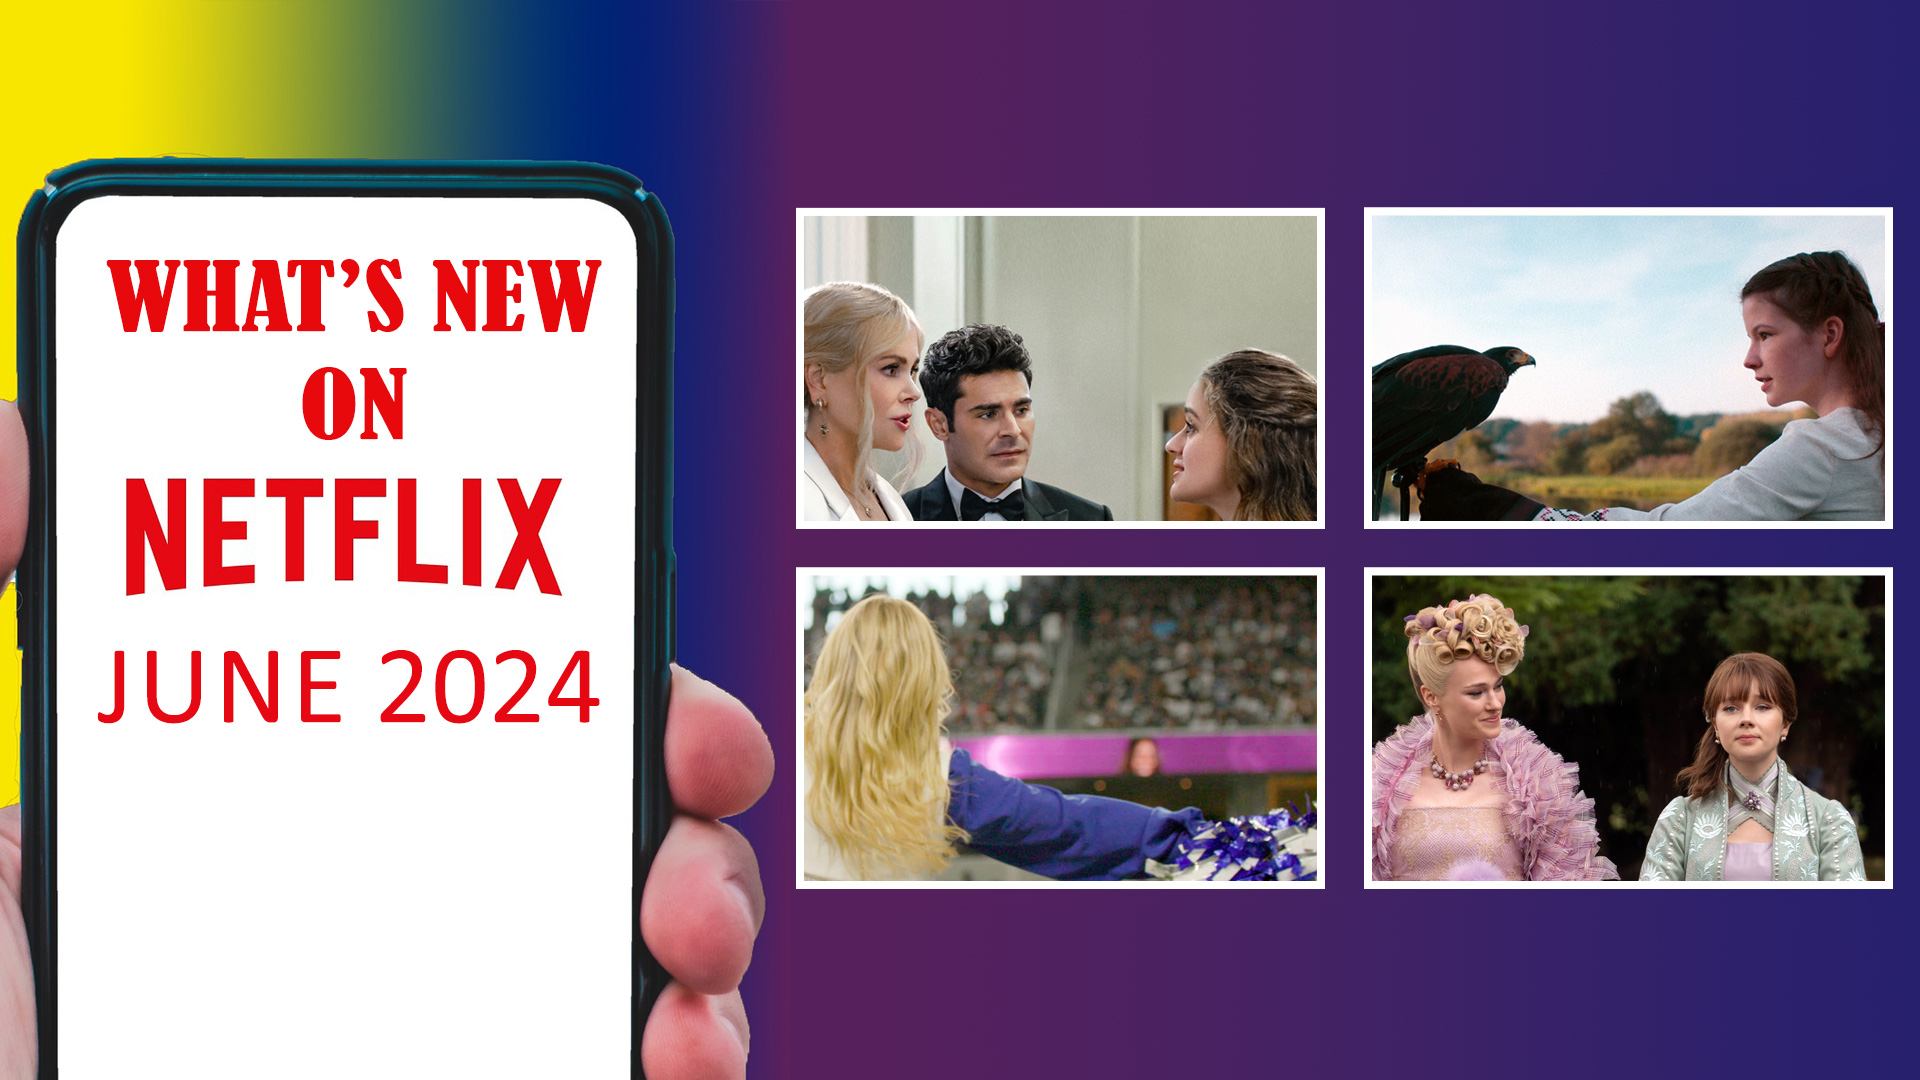 What's New on Netflix June 2024